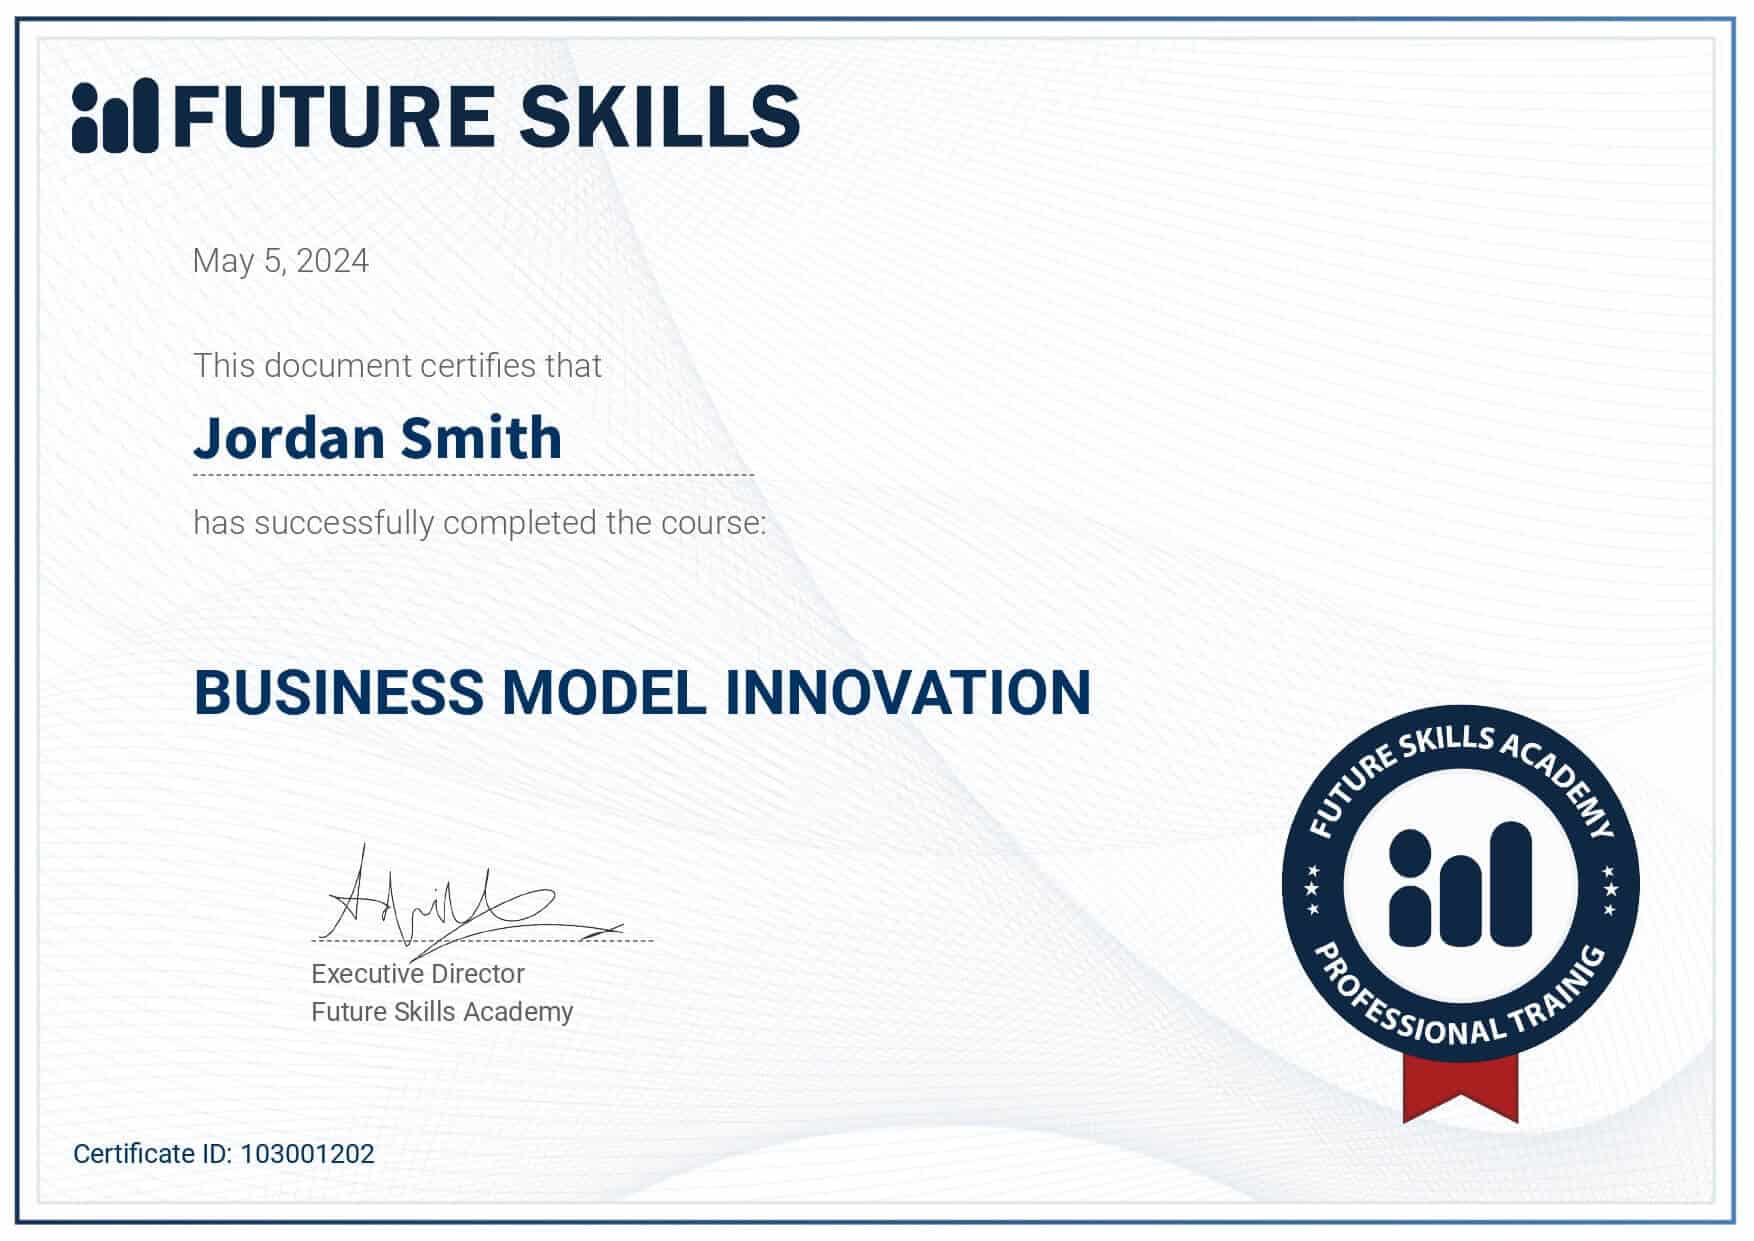 Business Model Innovation course